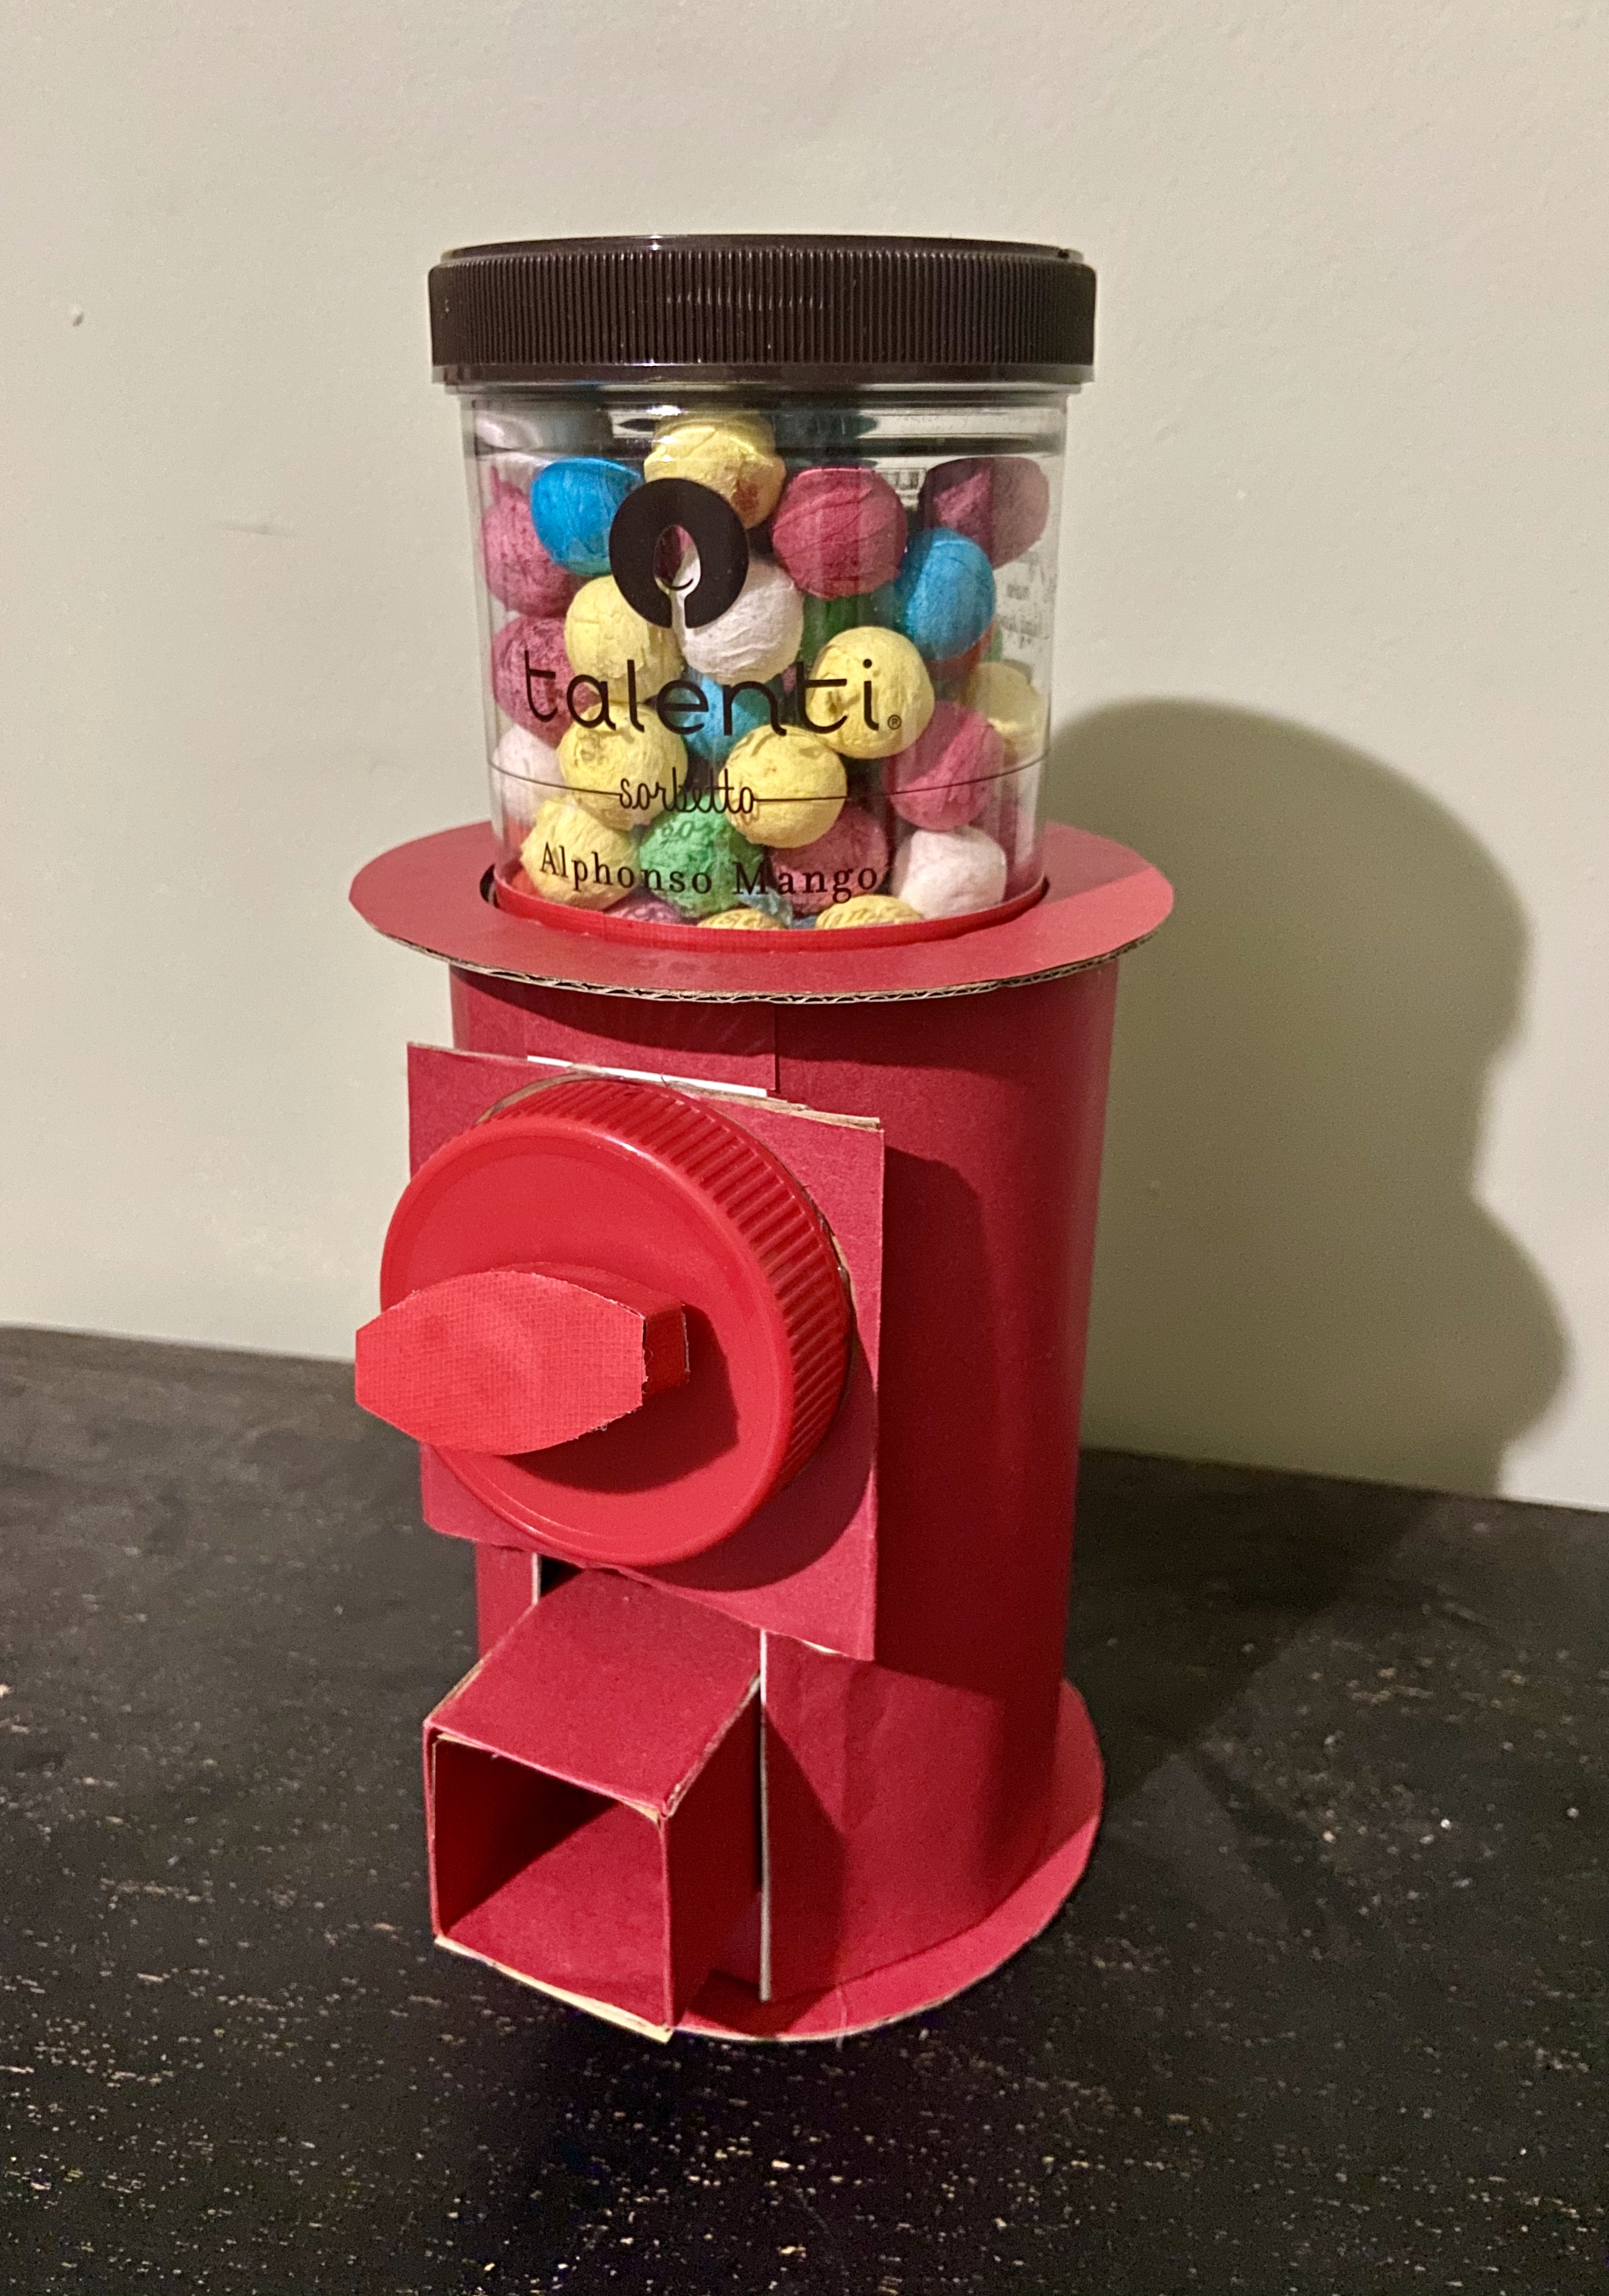 Completed Gumball Machine